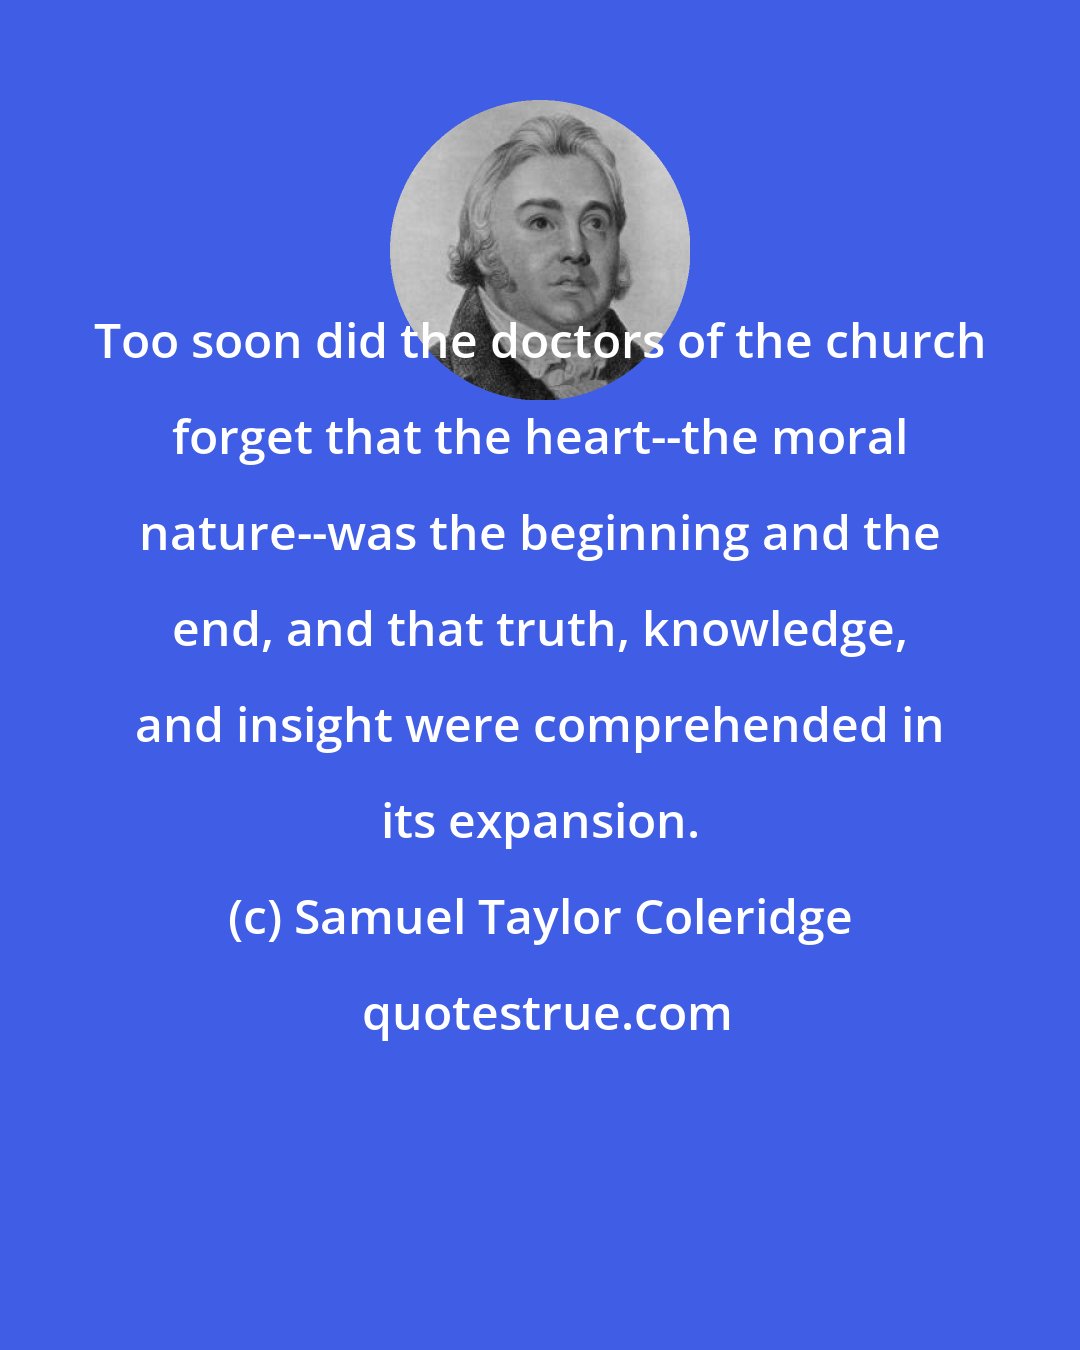 Samuel Taylor Coleridge: Too soon did the doctors of the church forget that the heart--the moral nature--was the beginning and the end, and that truth, knowledge, and insight were comprehended in its expansion.